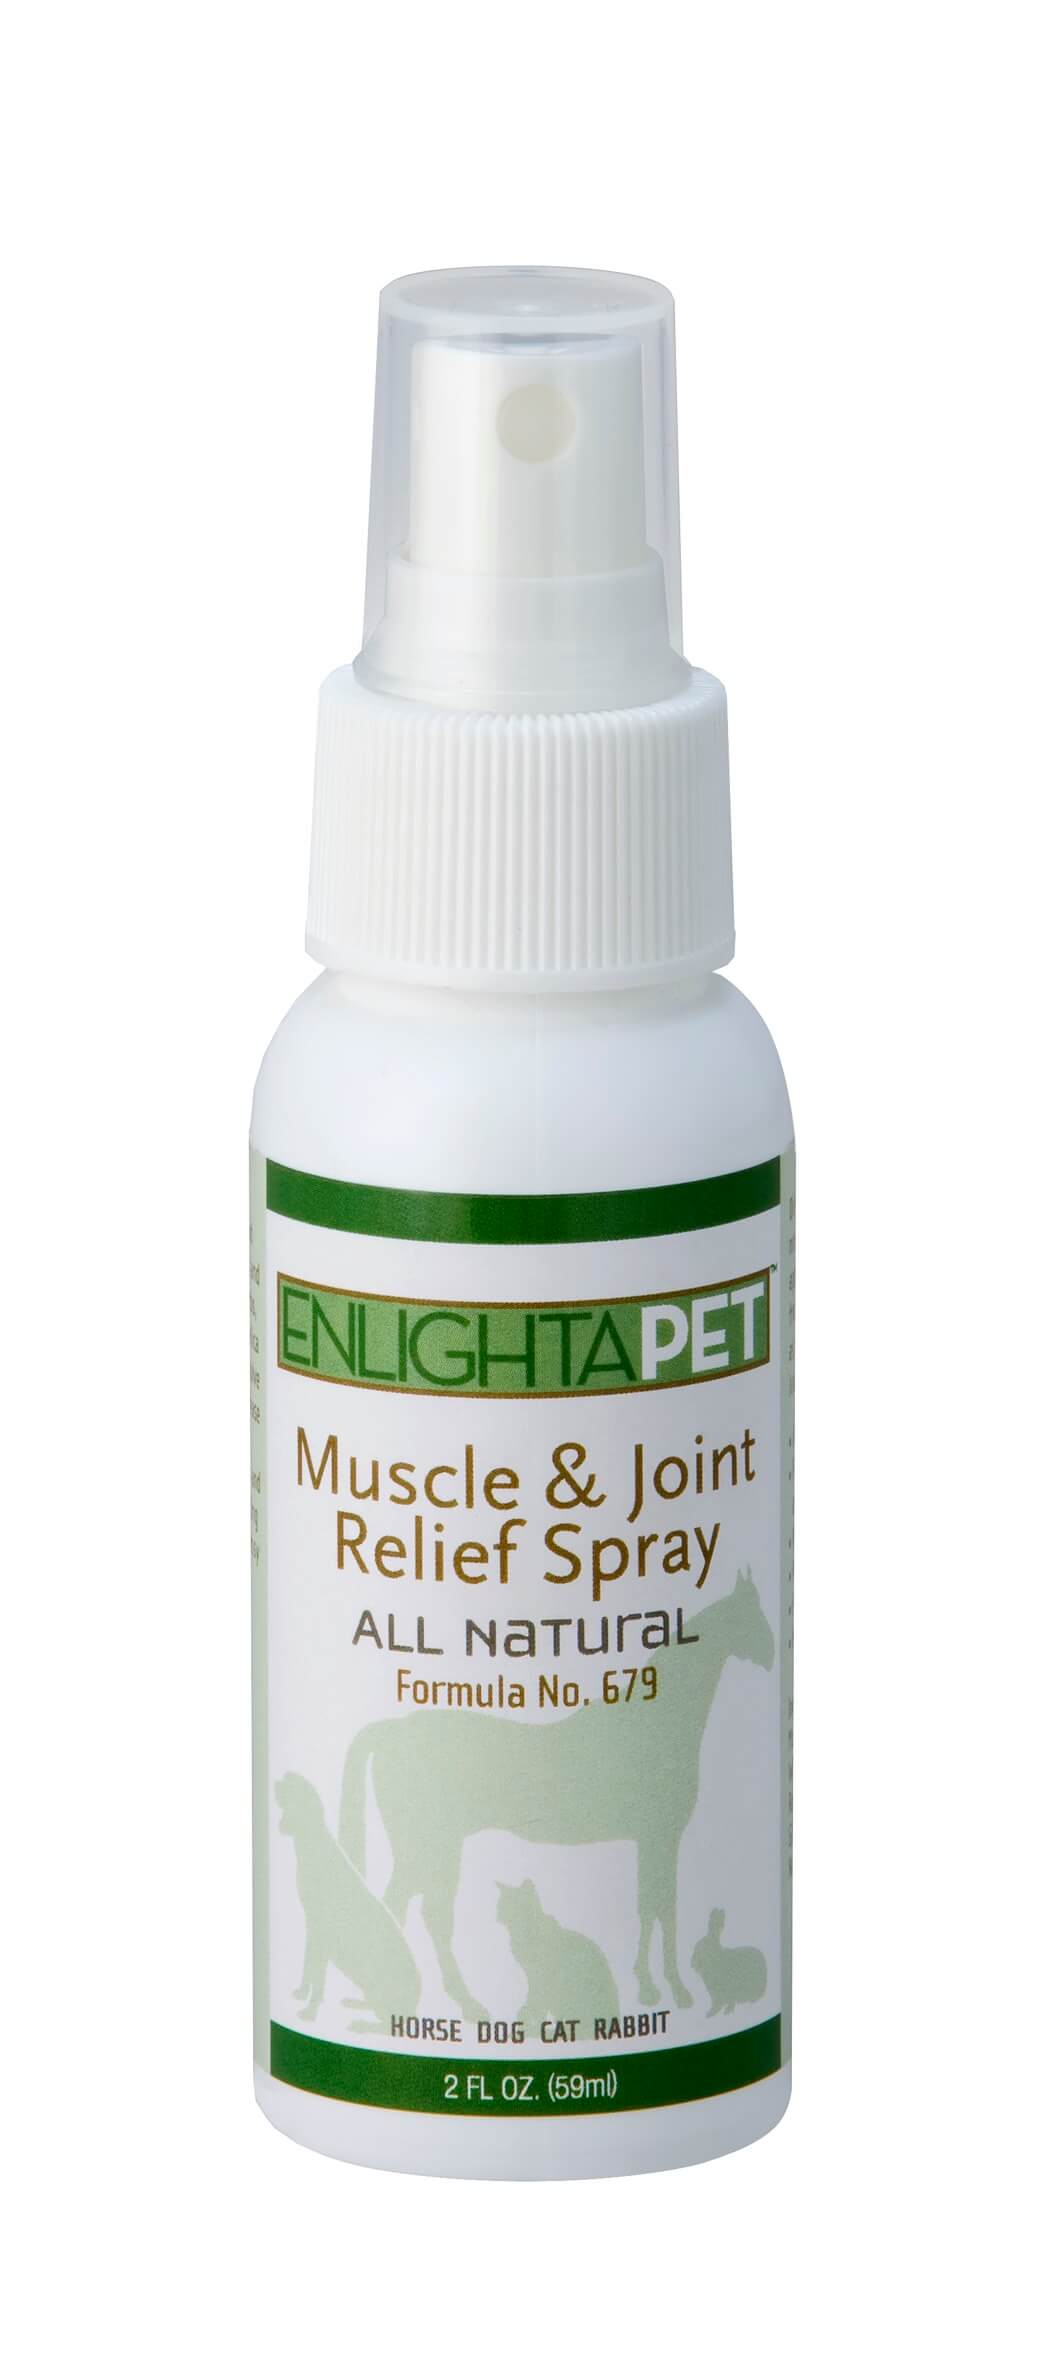 EnlightaPet™ Muscle & Joint Relief Spray